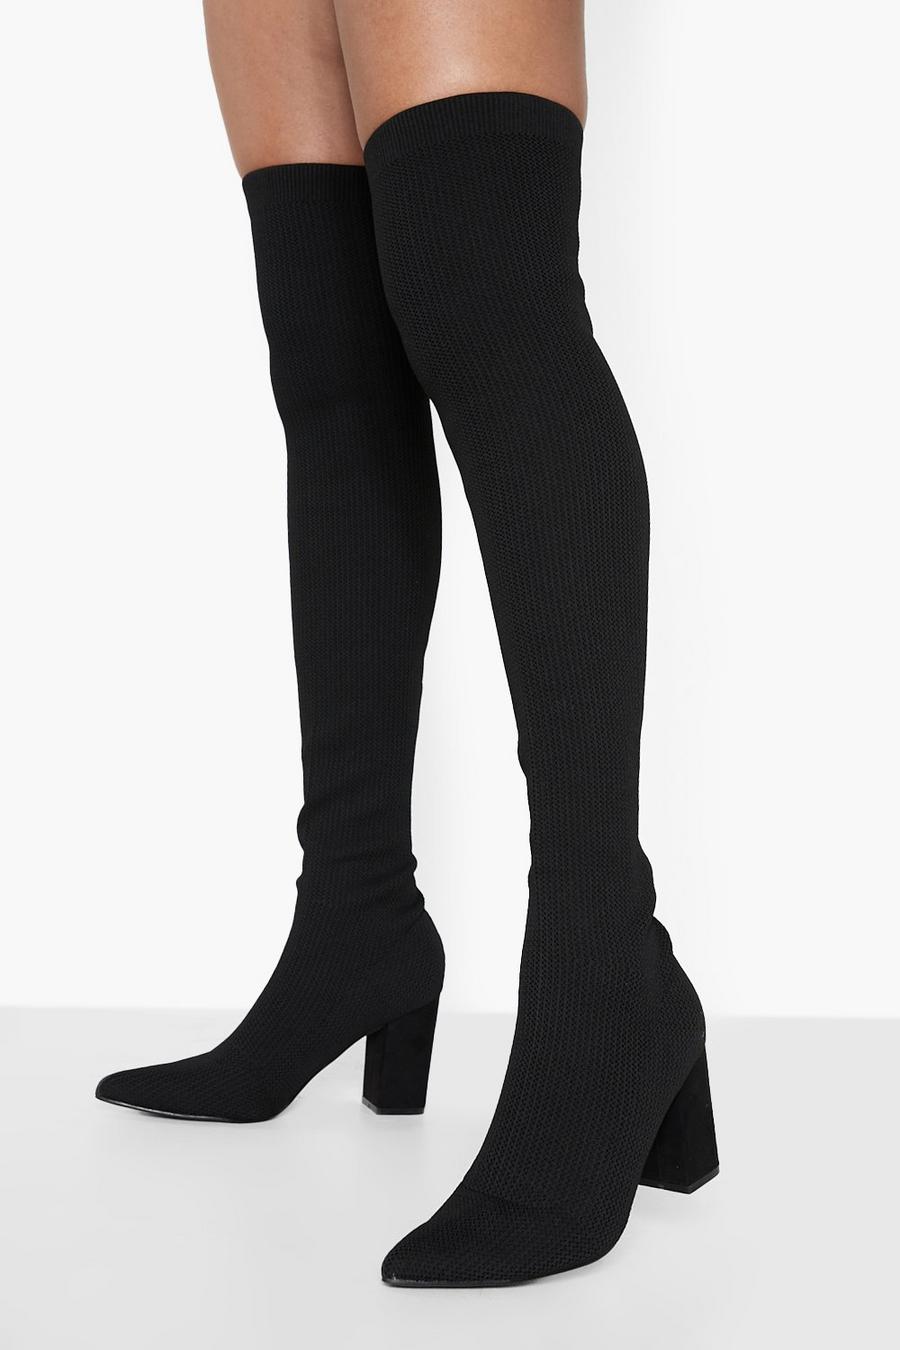 Black Knitted Stretch Over The Knee Boots